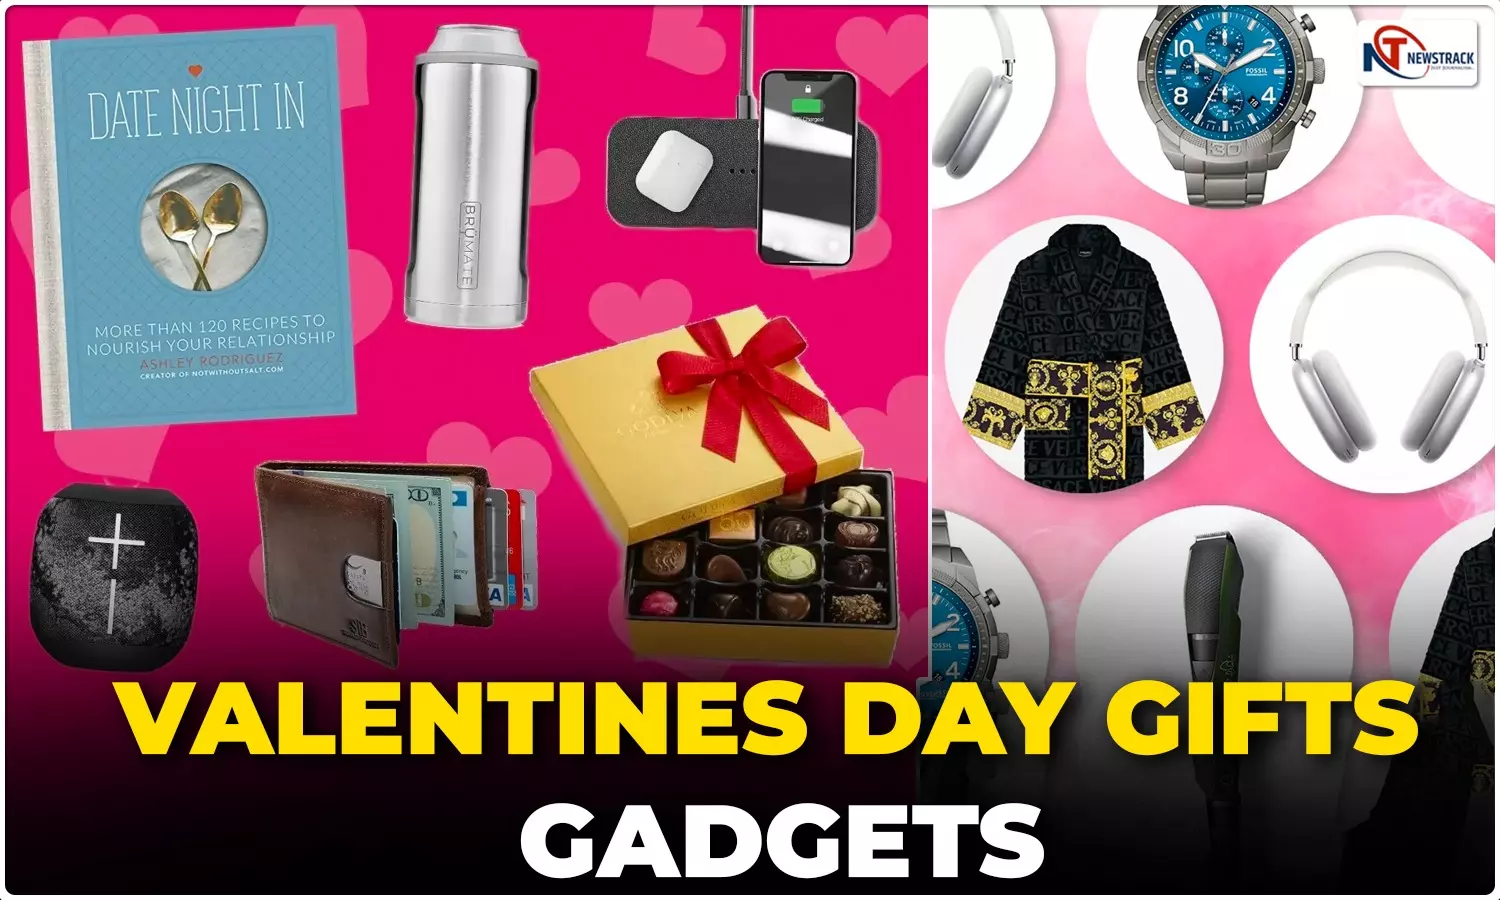 Valentines Day Gifts Ideas Best Smartphones and Gadgets